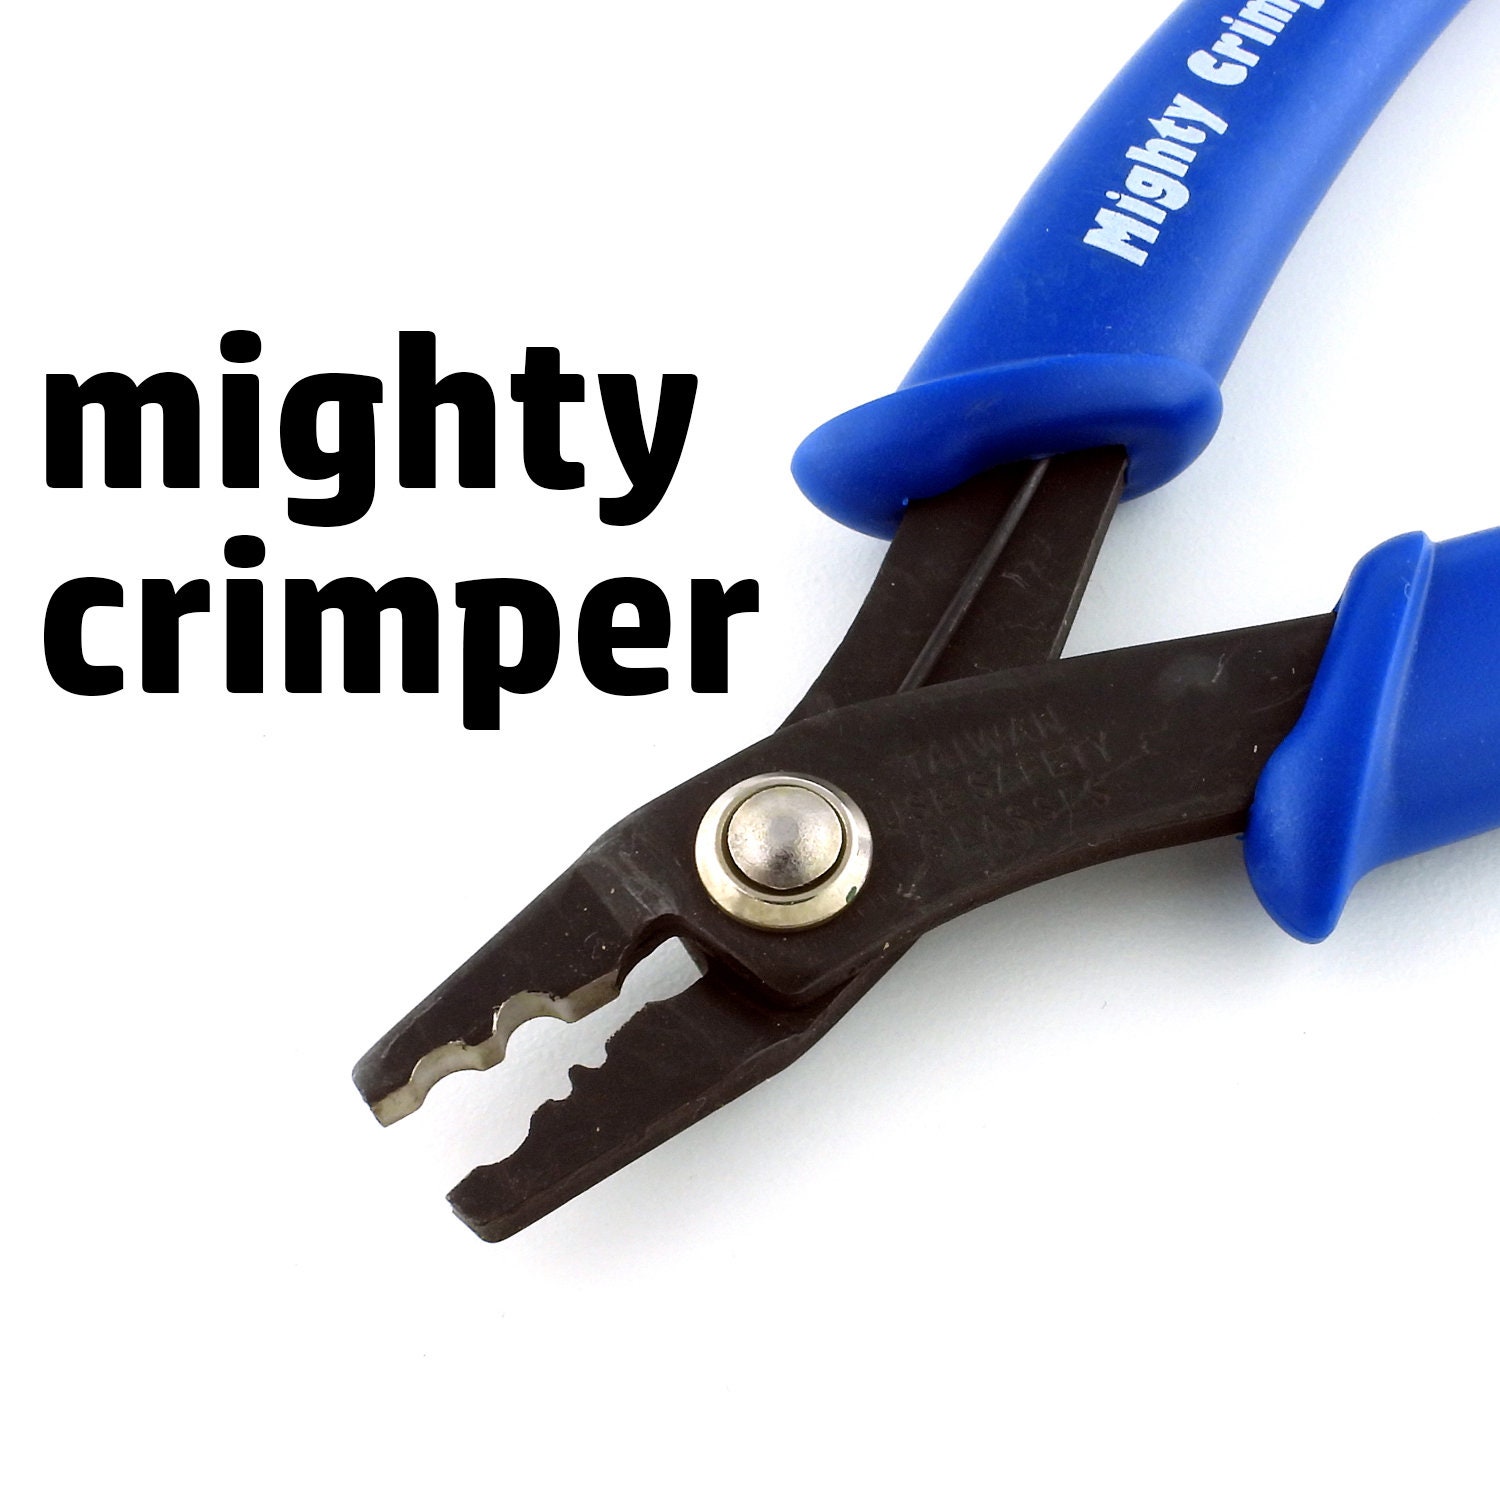 The Mighty Crimper, Crimping Pliers for Crimps, Crimper Tools for Jewelry  Design, Irina Miech 